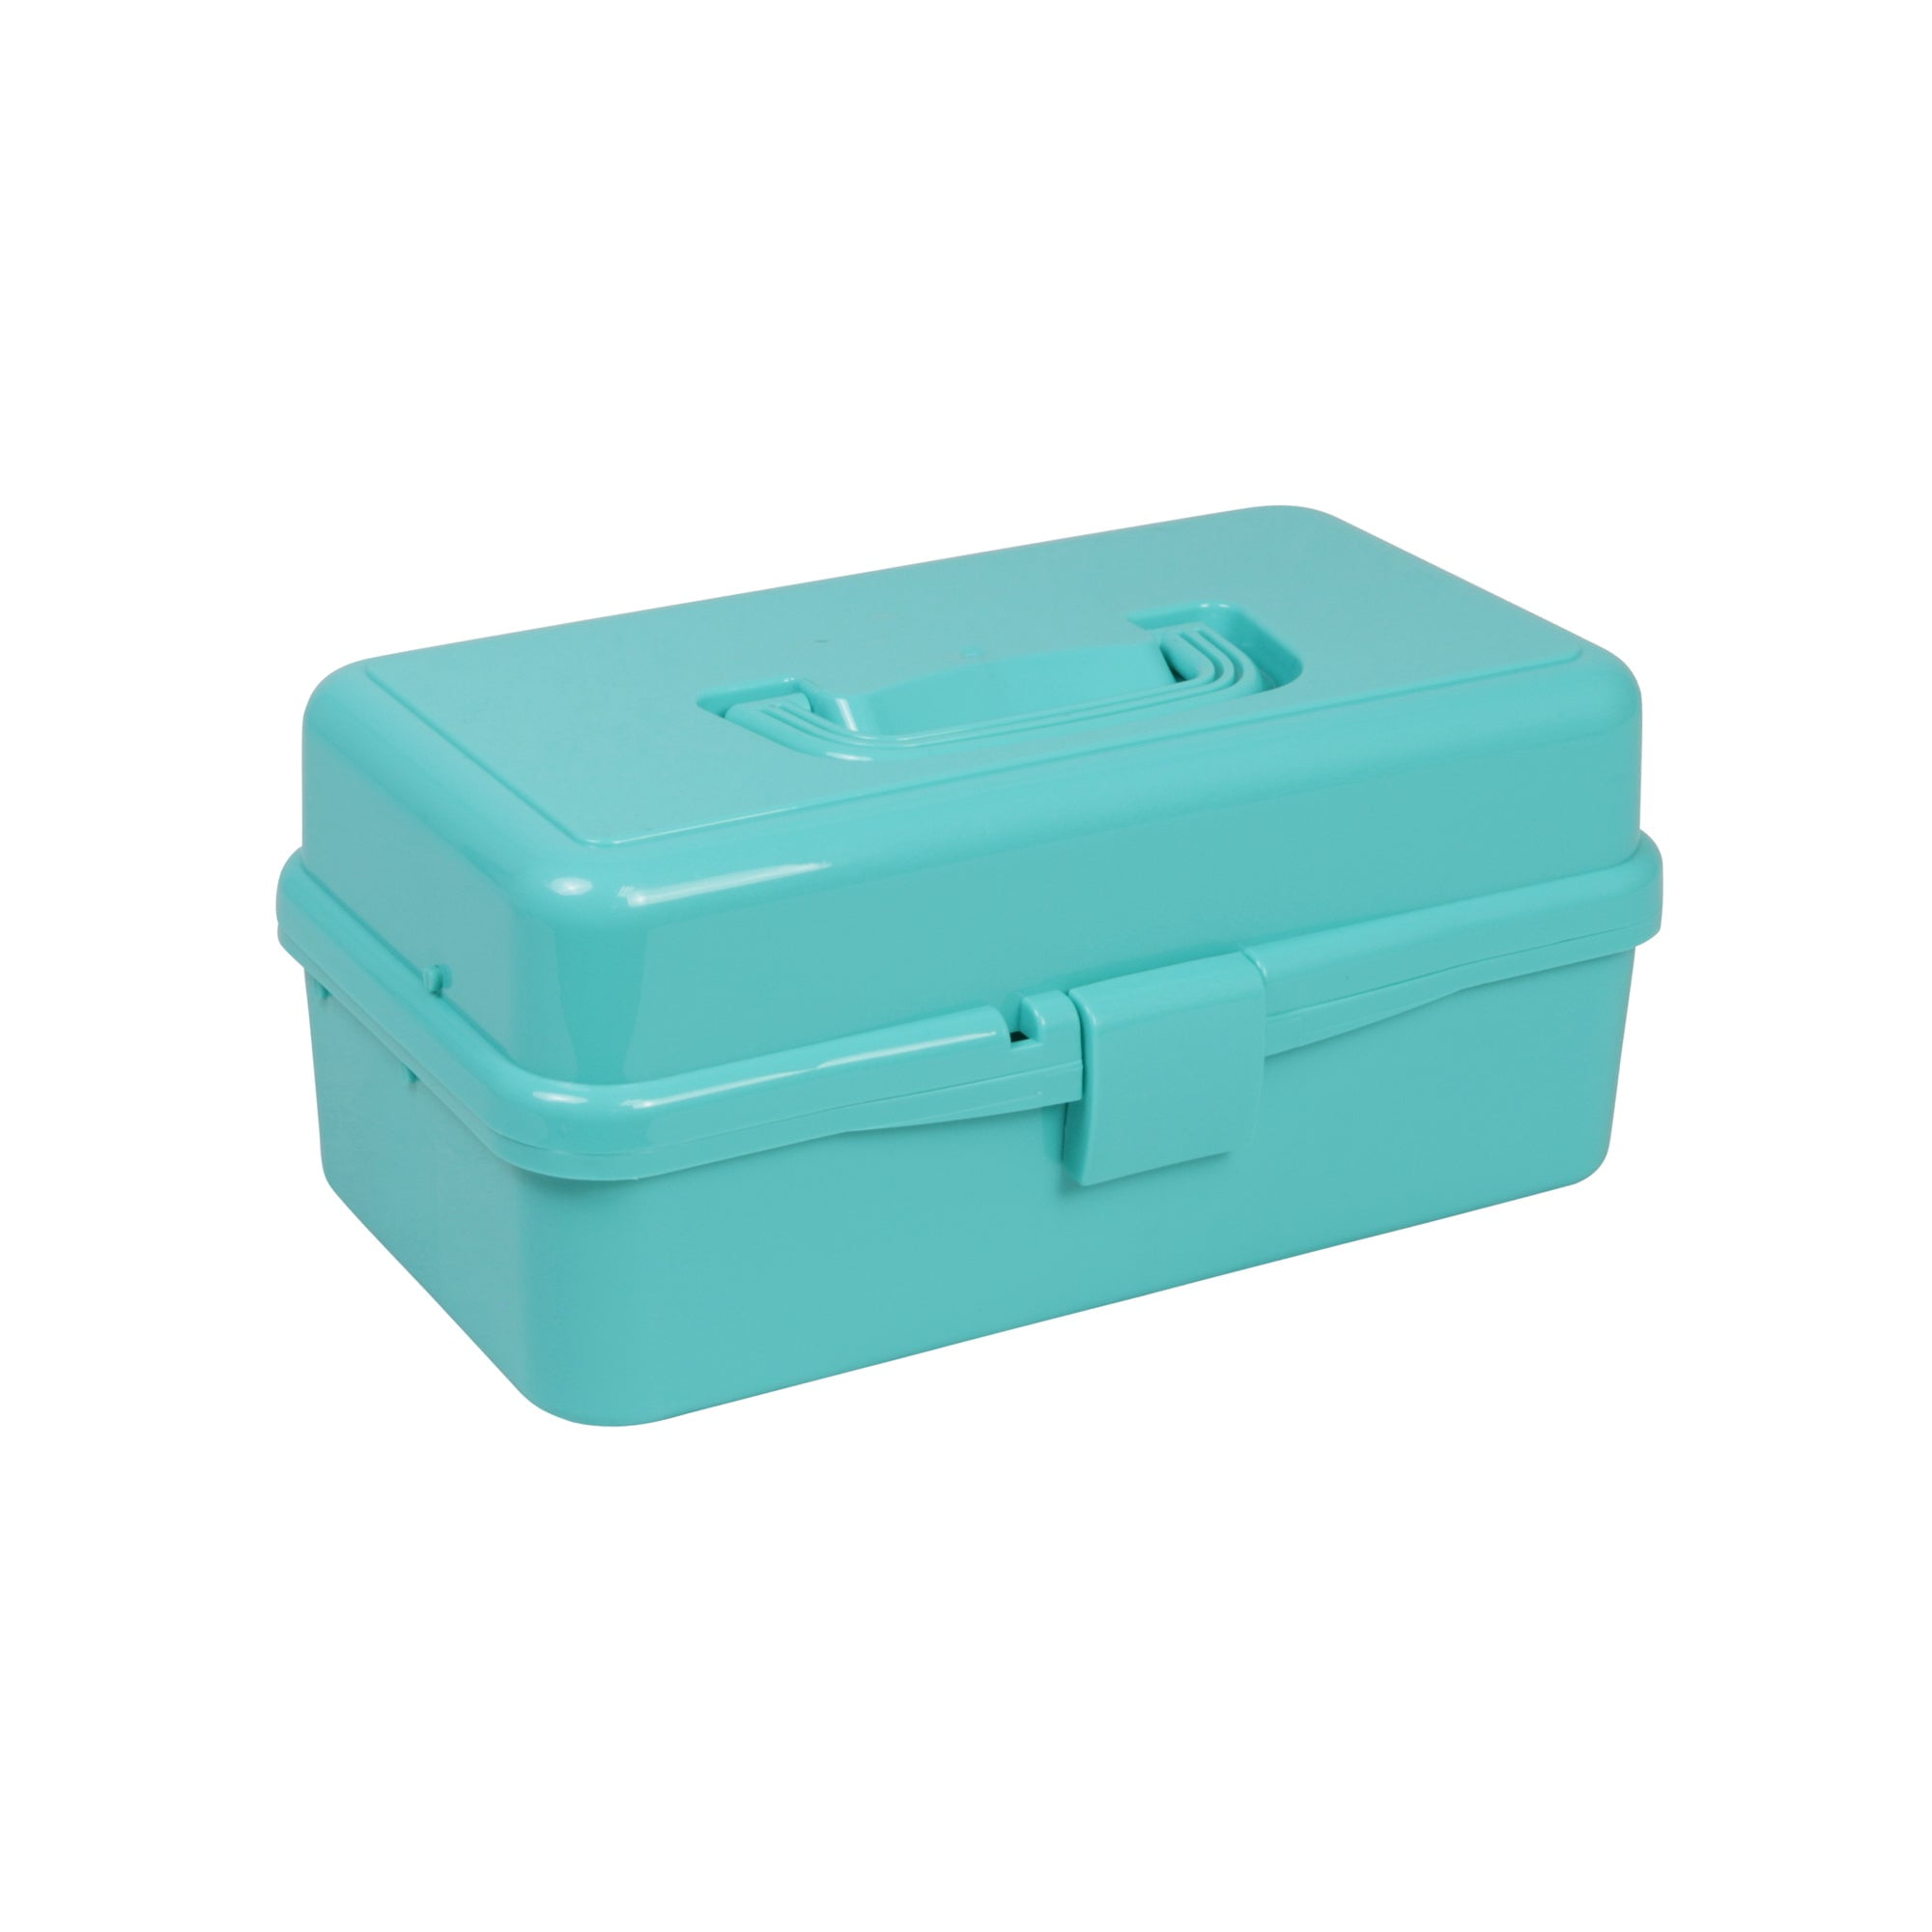 Cheers.us 3 Layers 18 Compartments Craft Organizer Box Plastic Adjustable Storage Box Case Small Storage Container Case for Beads Crafts Jewelry